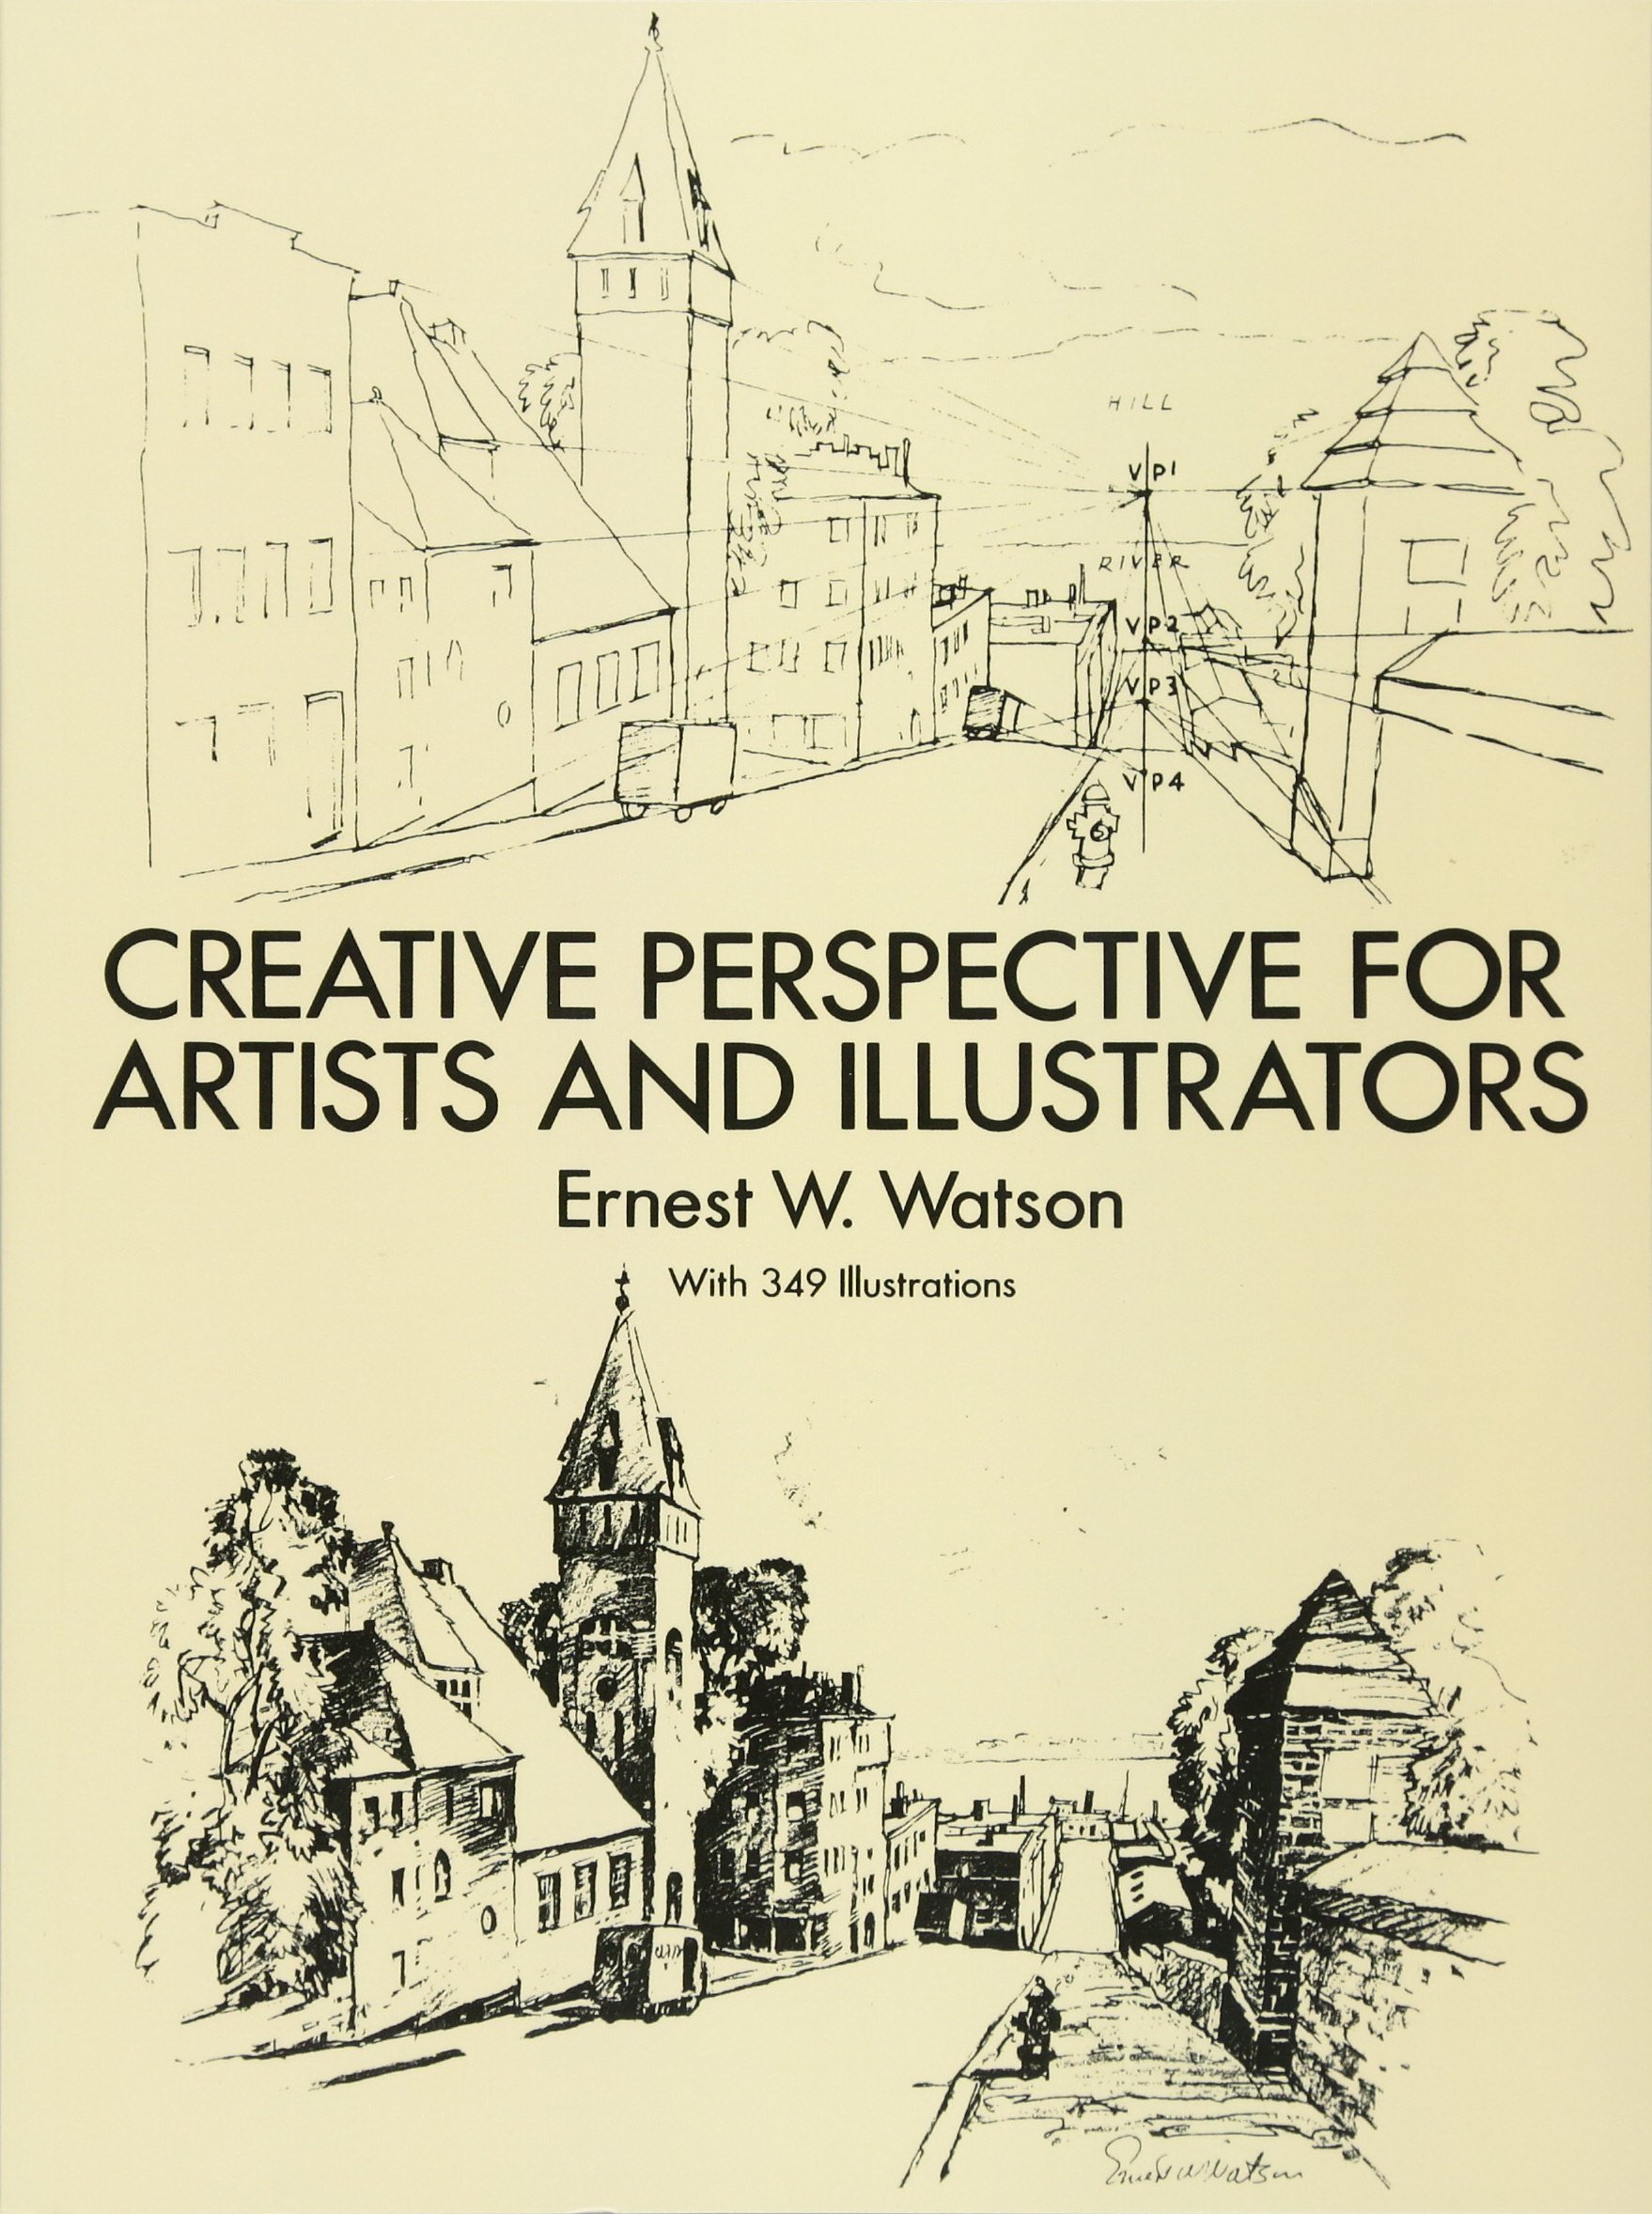 creative perspective for artists and illustrators pdf free download